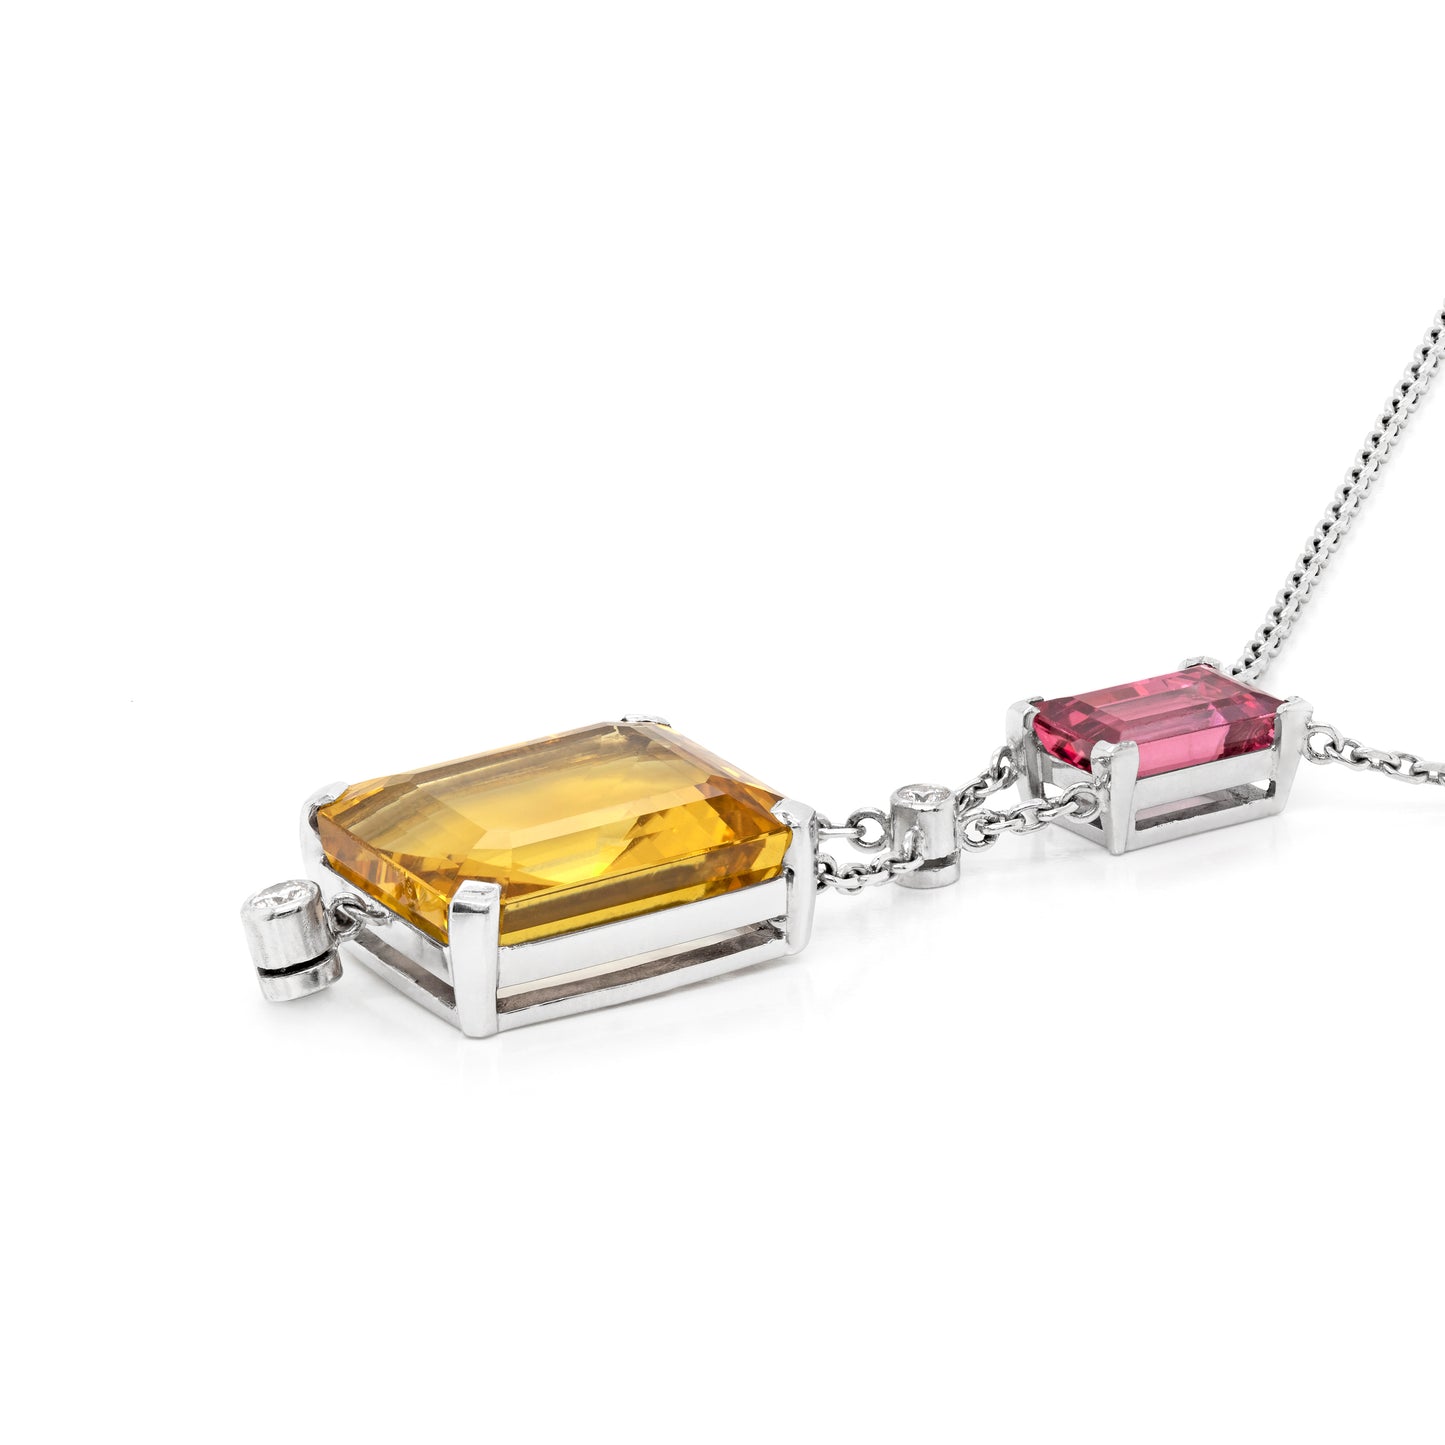 Diamond, Yellow Beryl and Pink Spinel 18 Carat White Gold Pendant Necklace